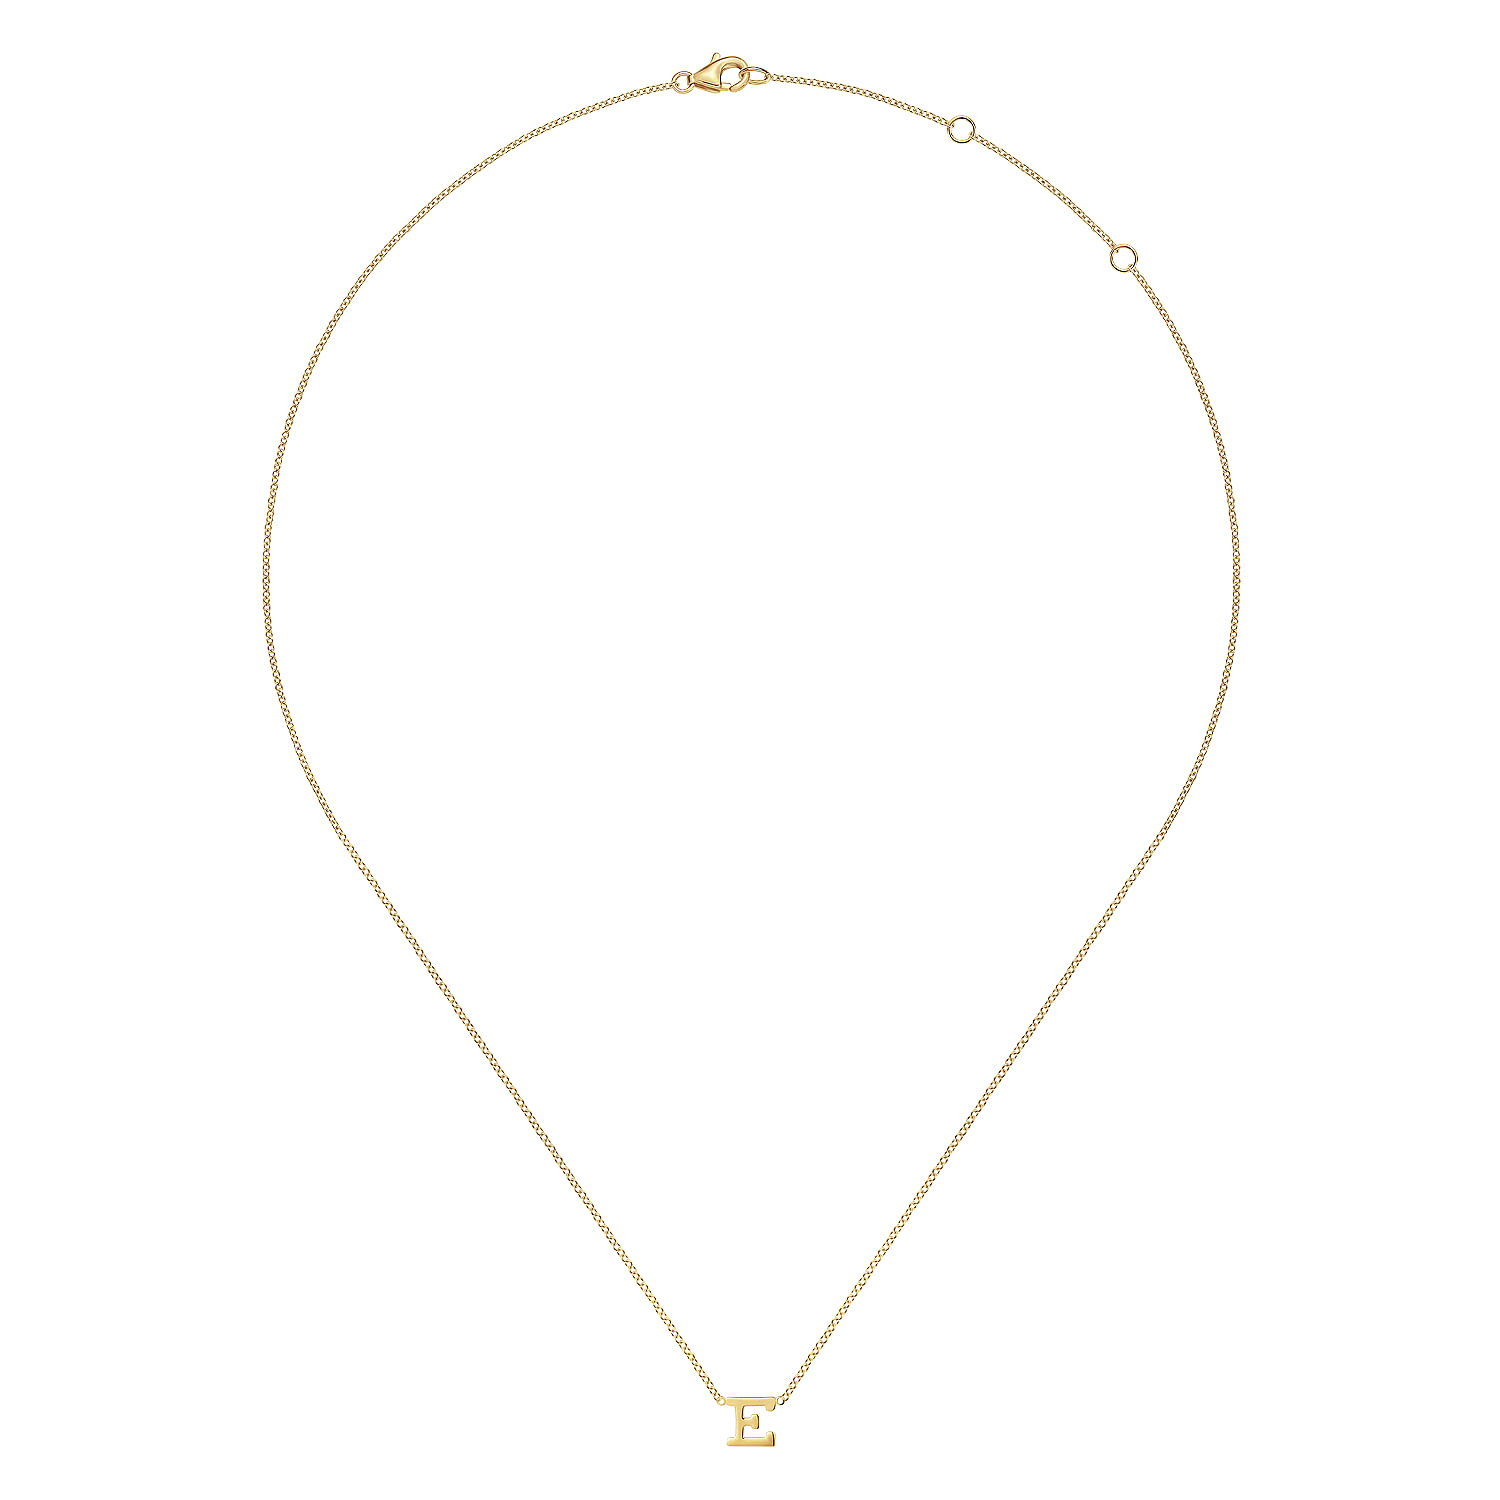 14K Yellow Gold E Initial Necklace